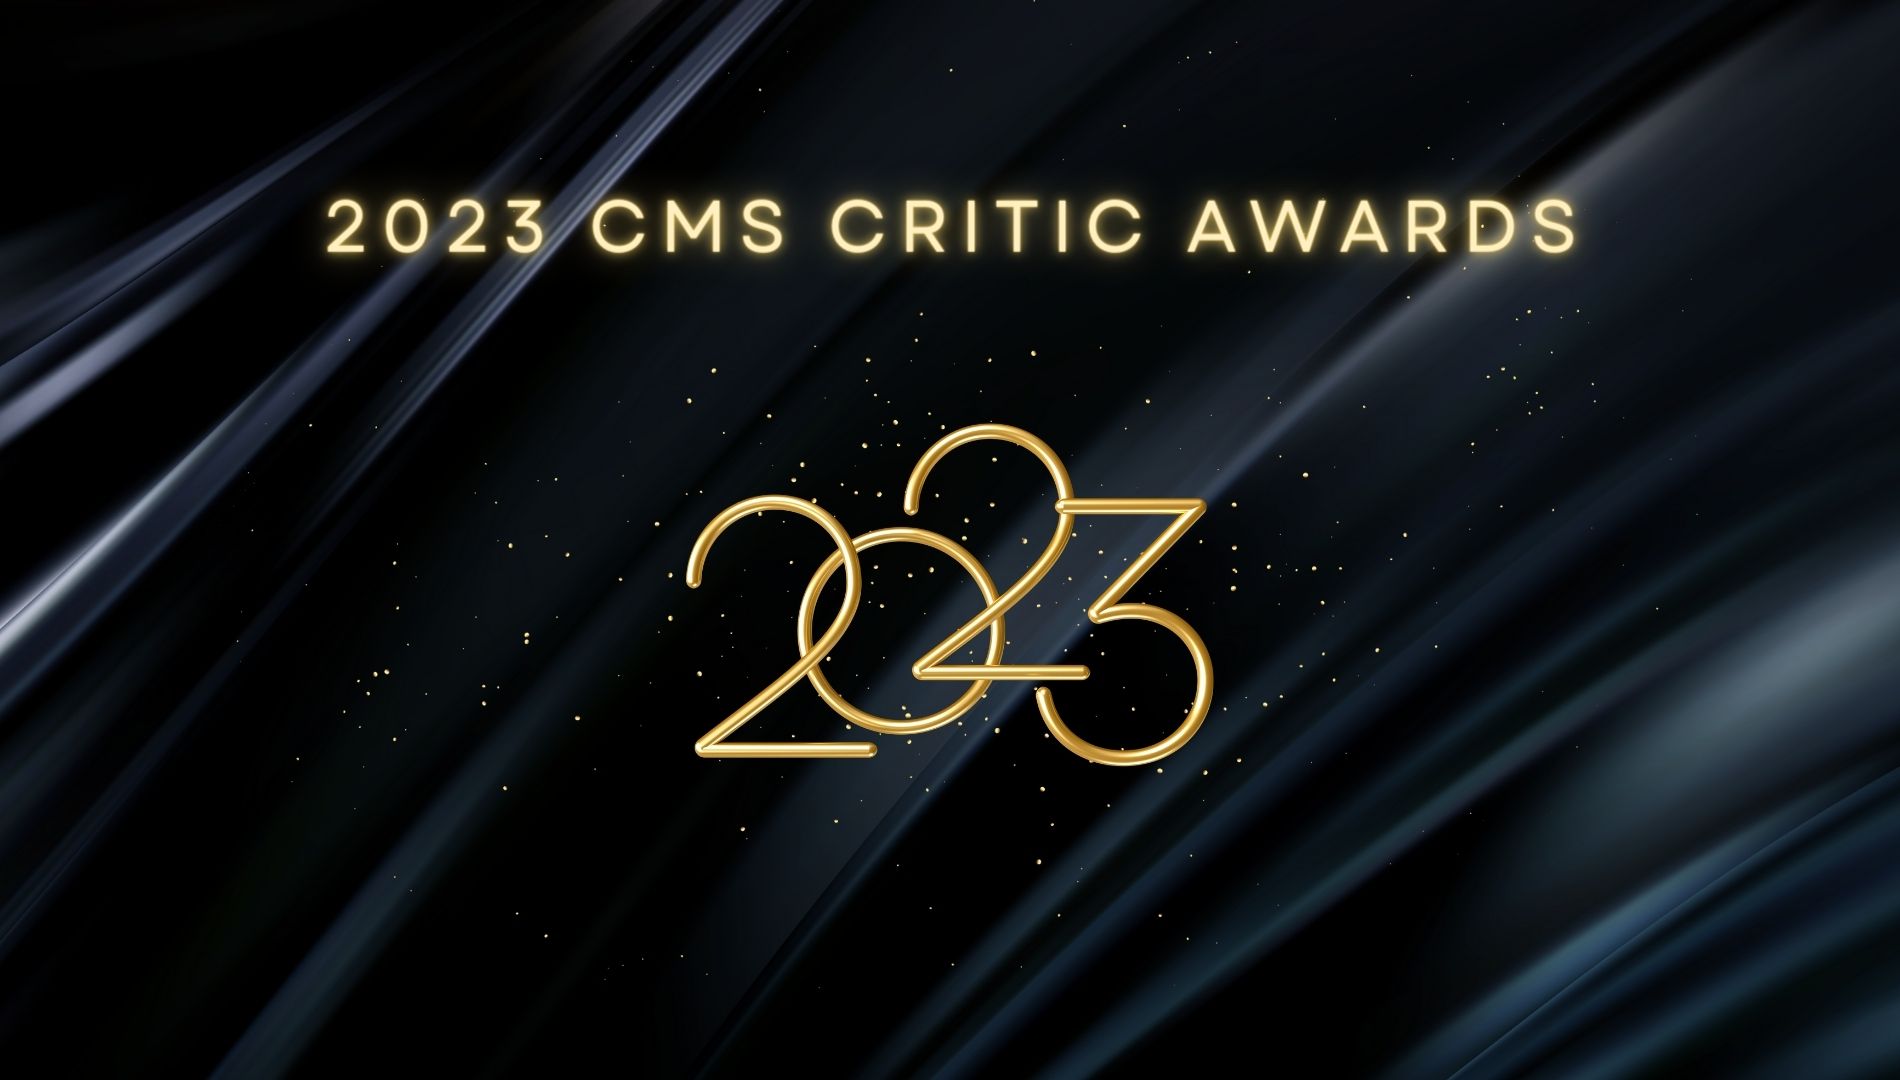 Celebrate Concrete CMS: Nominate Us in the CMS Critic Awards!